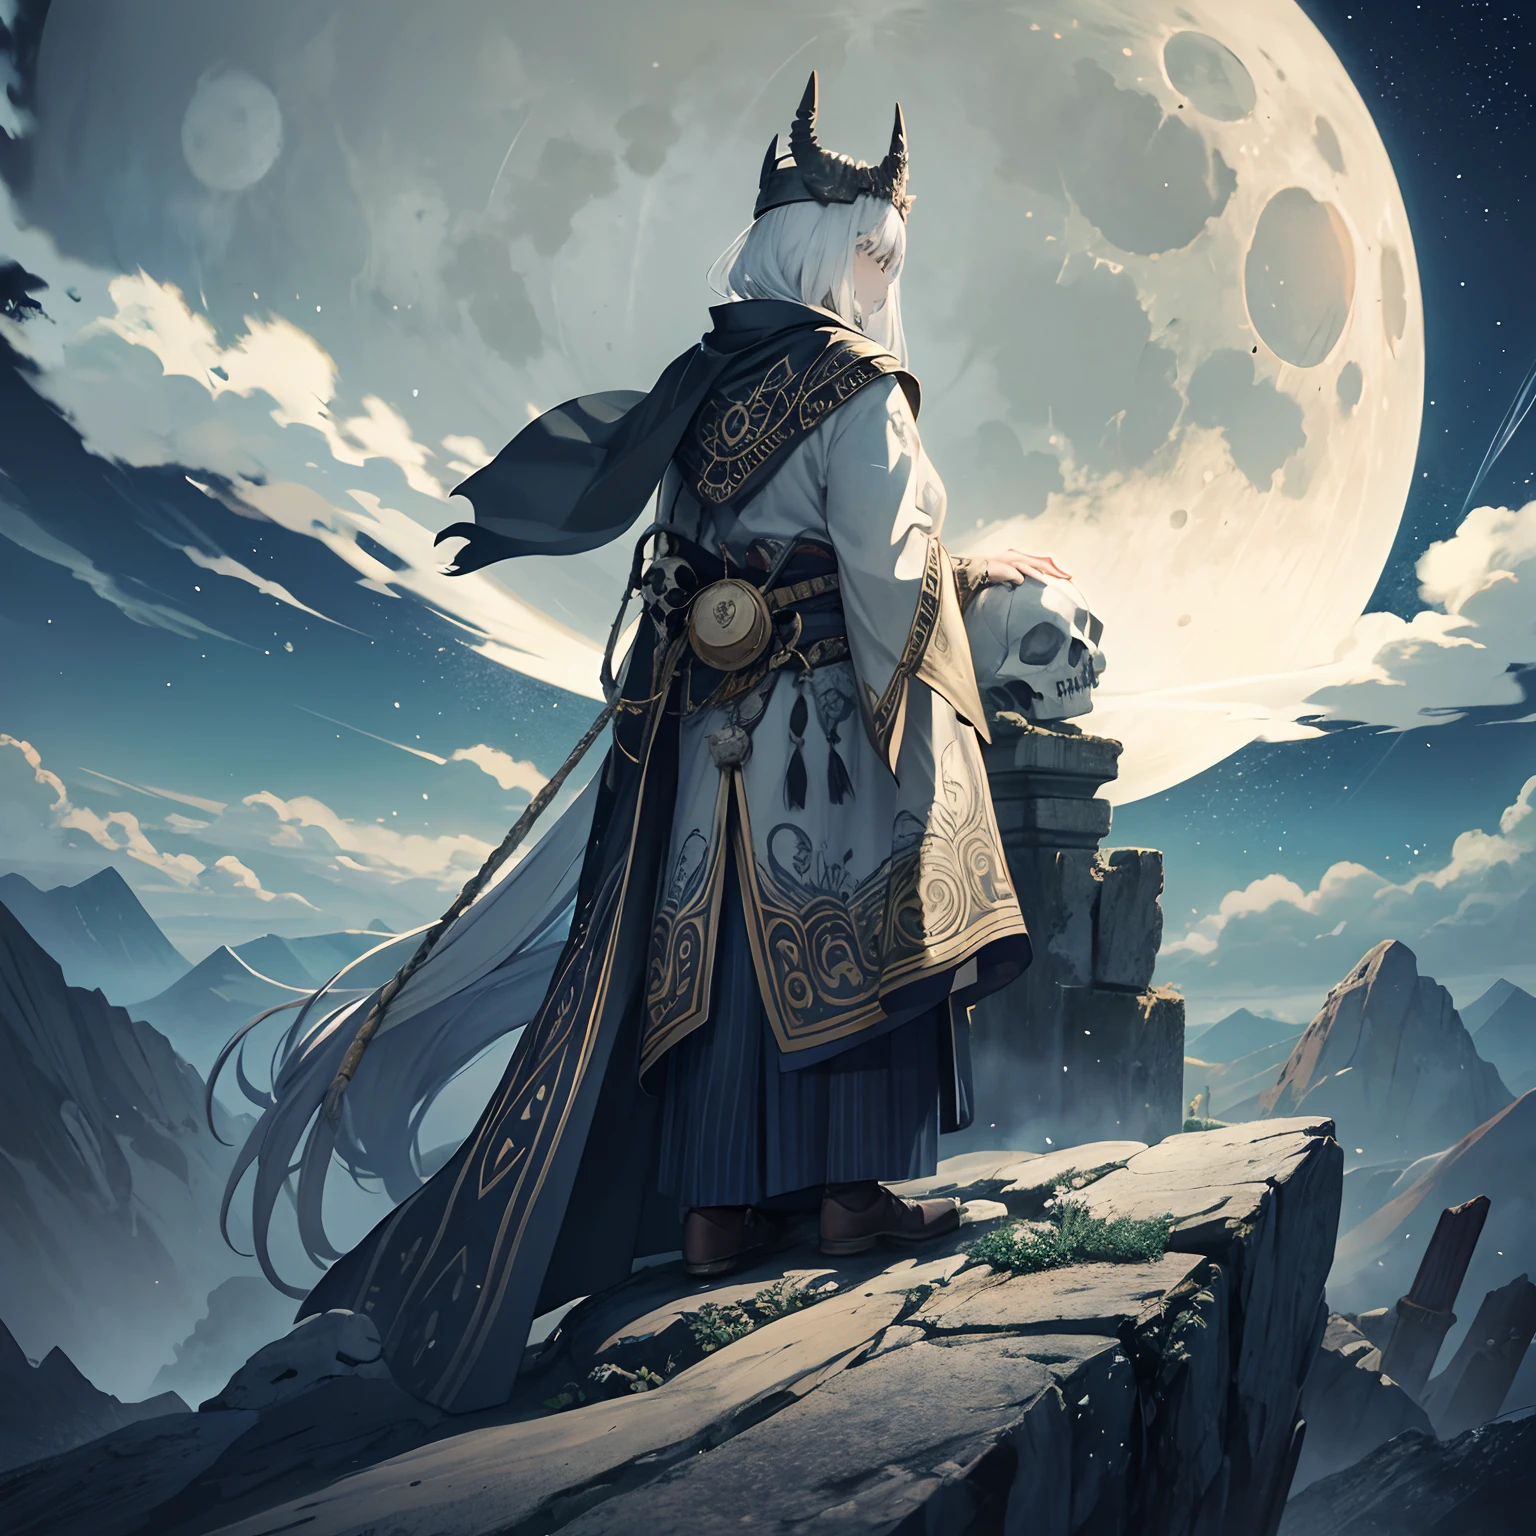 Ancient wizard, character dressed in printed tunic, large moon with a skull image cloudy landscape in the background, illustrations with Halloween symbolism